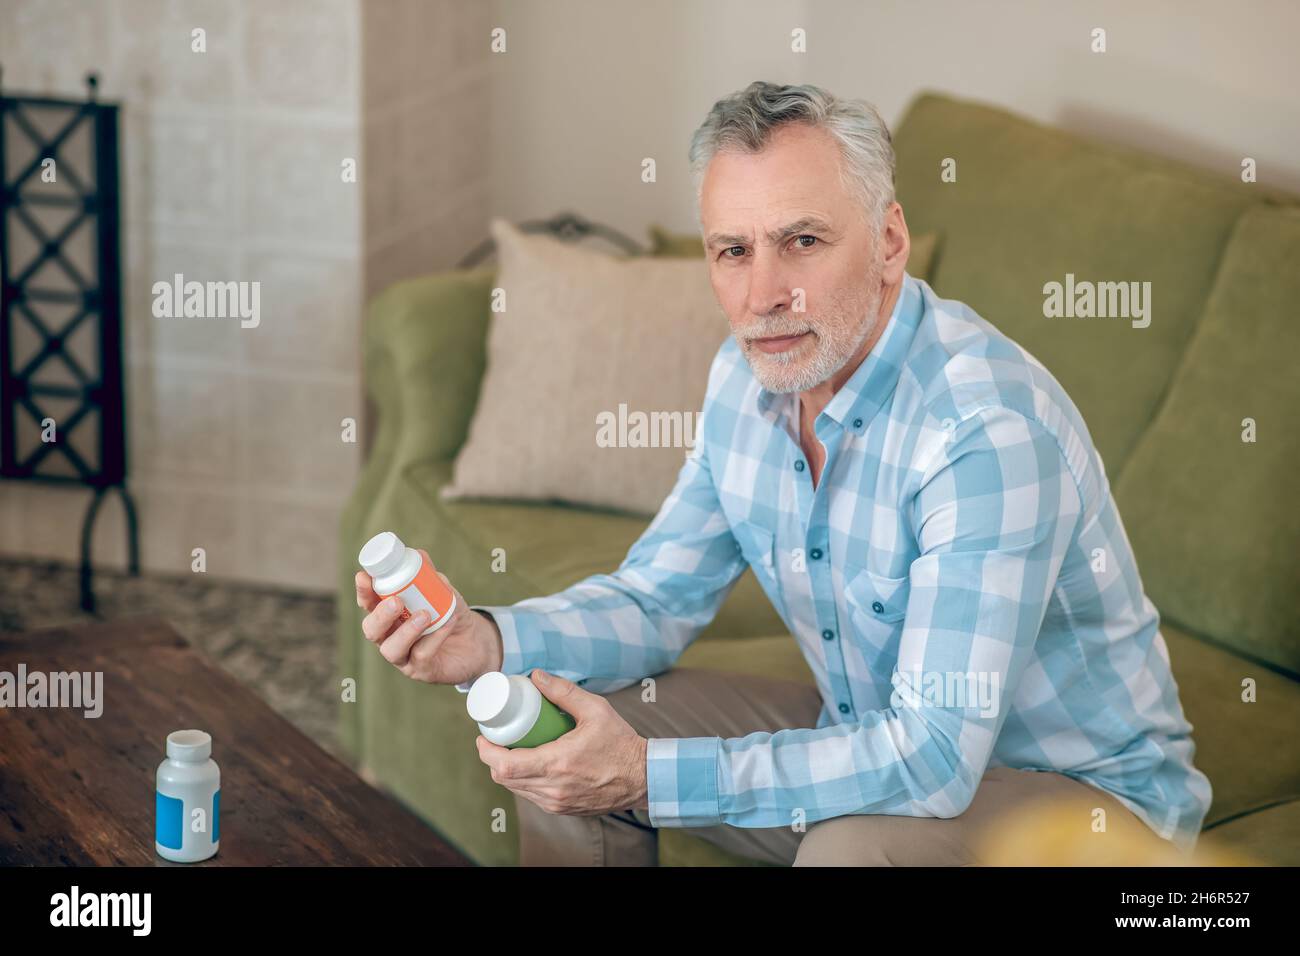 Man in a plaid shirt holding dietary supplements Stock Photo